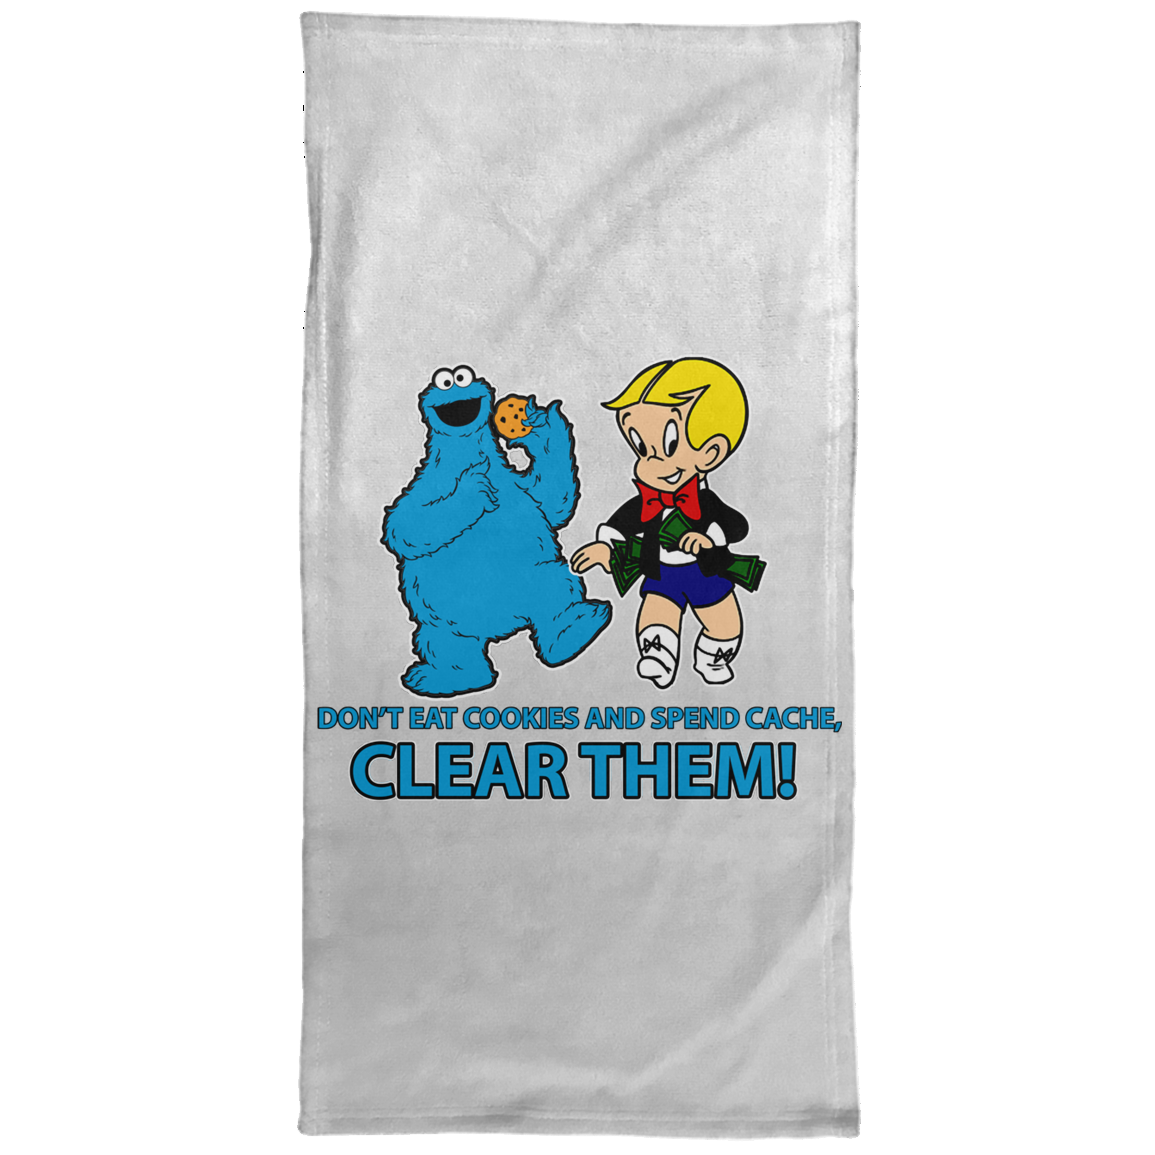 ArtichokeUSA Custom Design. Don't Eat Cookies And Spend Cache! Delete Them! Cookie Monster and Richie Rich Fan Art/Parody. Towel - 15x30